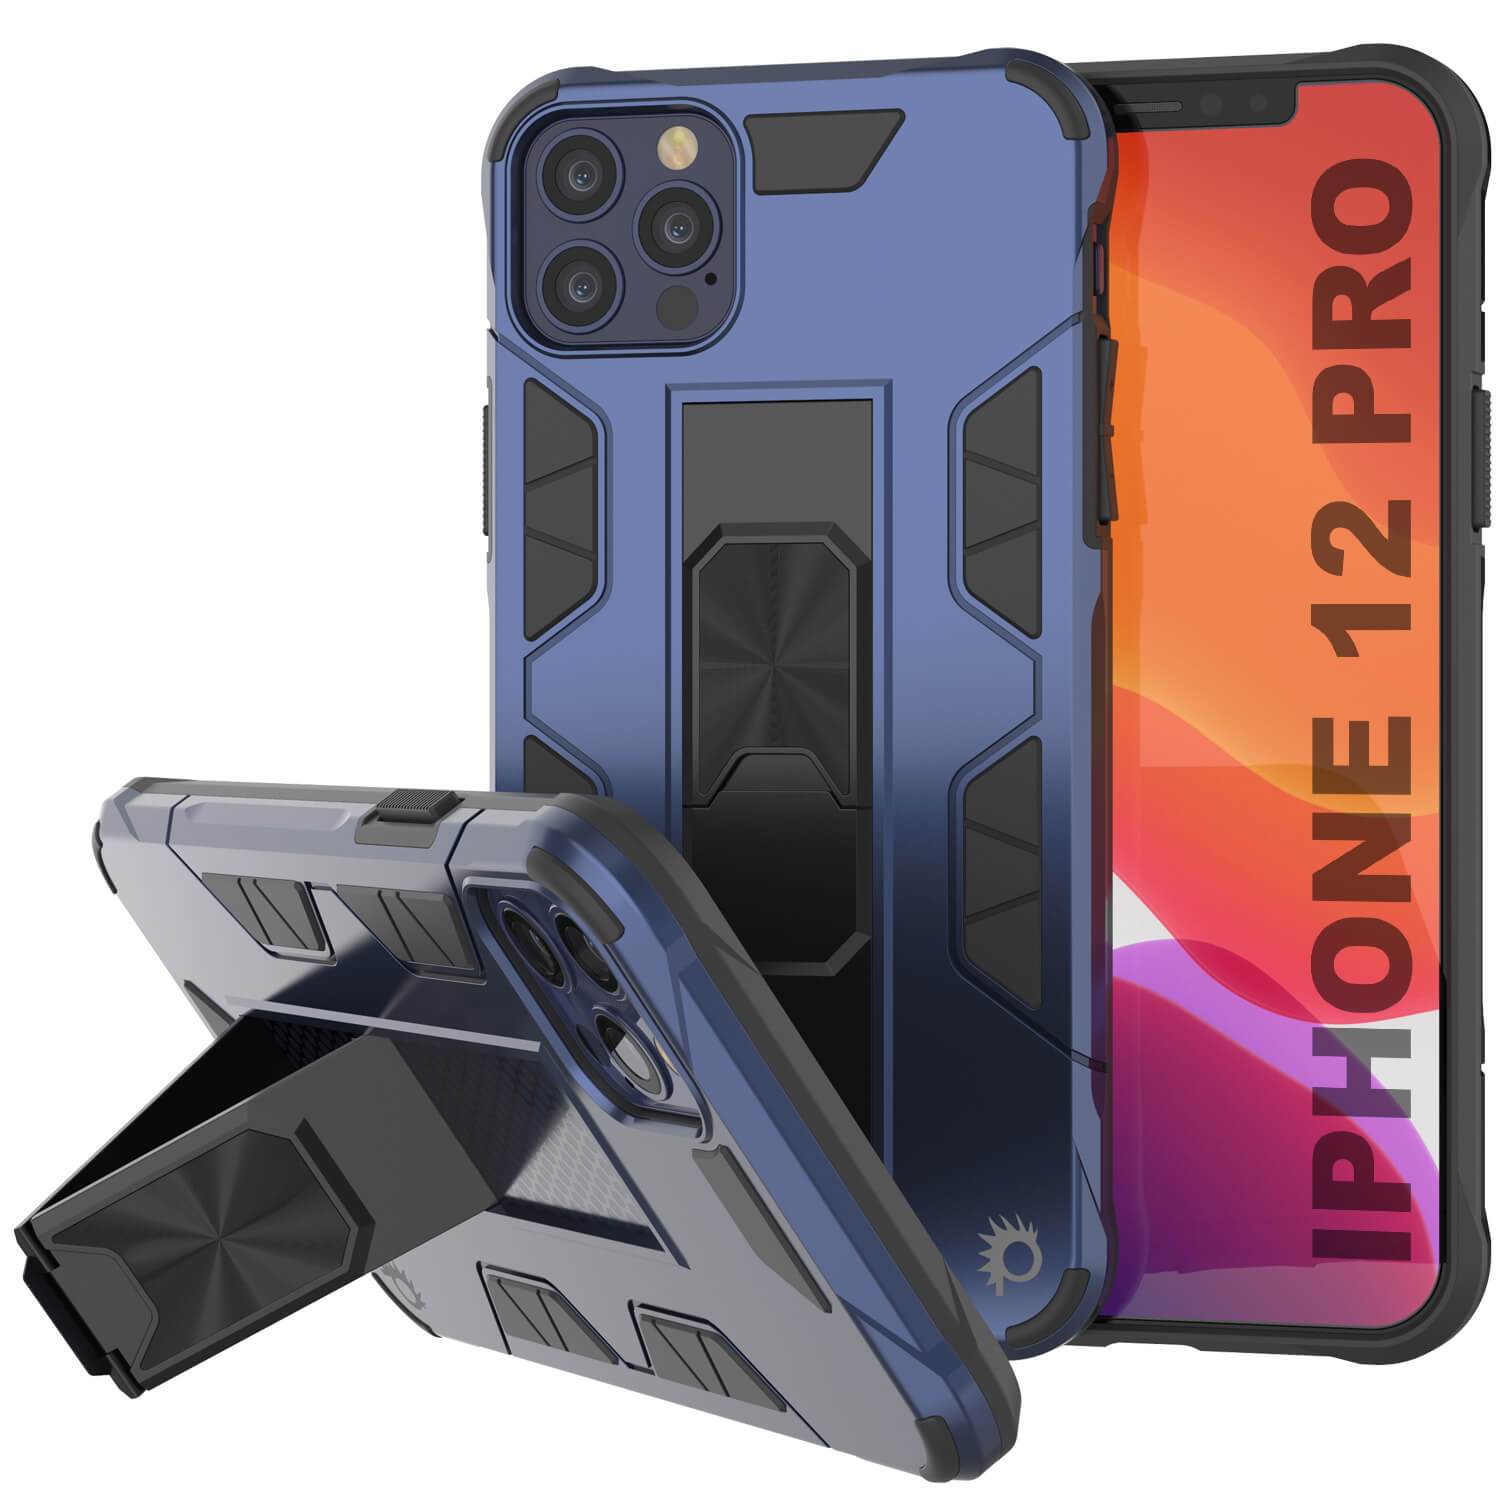 Punkcase iPhone 12 Pro Case [ArmorShield Series] Military Style Protective Dual Layer Case Navy-Blue (Color in image: Navy Blue)